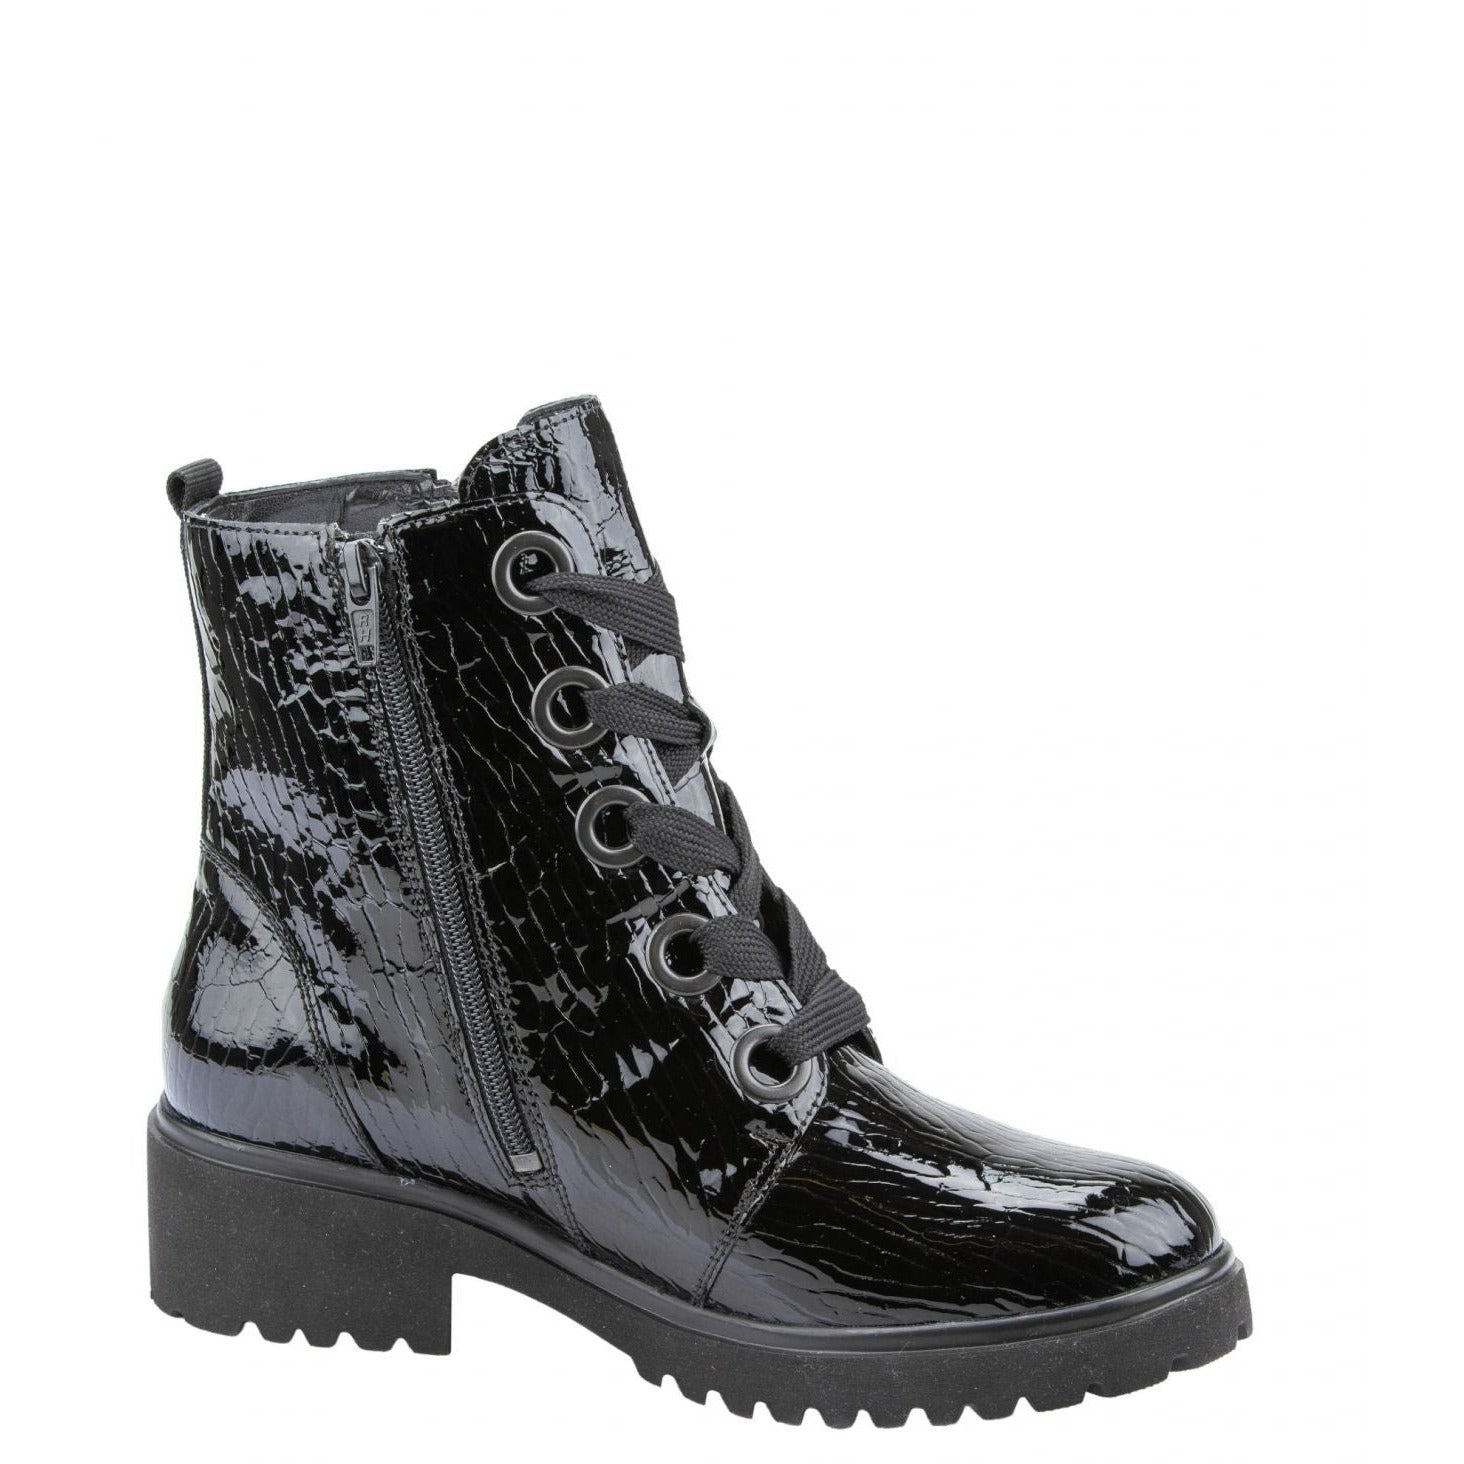 Waldlaufer Luise (716802) - Ladies Lace up Boot with Zip in Black Patent. Waldlaufer Shoes & Boots | Wide fit Shoes | Wisemans | Bantry | West Cork | Cork | Ireland